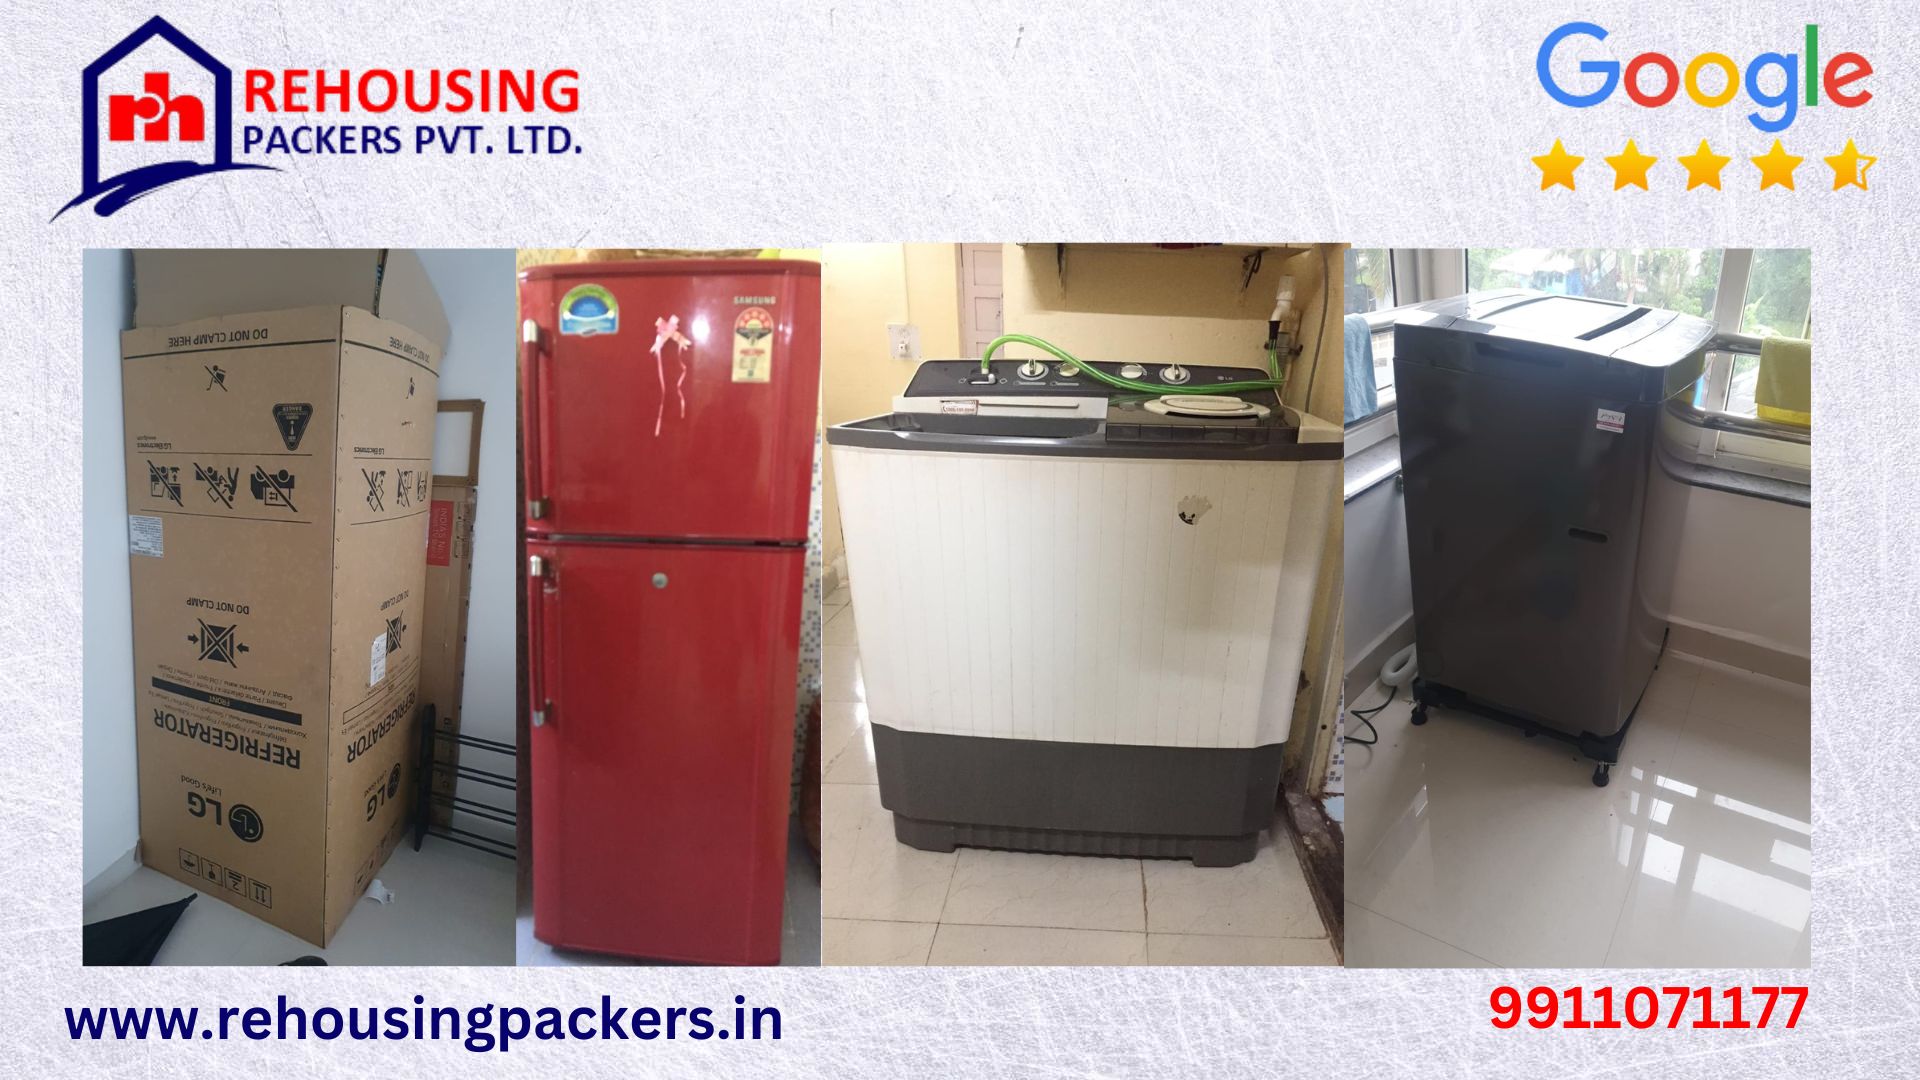 Packers and Movers from Bhubaneswar to Nagpur